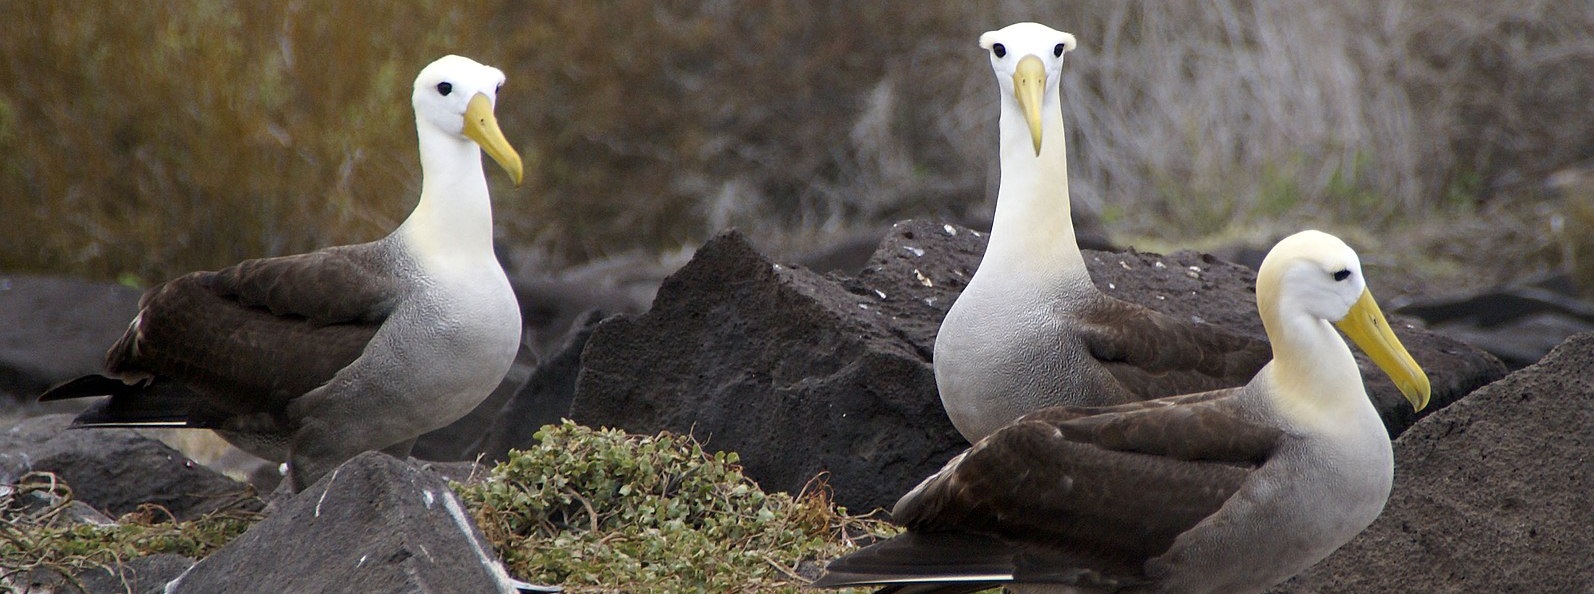 By putneymark - originally posted to Flickr as Waved albatrosses Espanola, CC BY-SA 2.0, https://commons.wikimedia.org/w/index.php?curid=3878685